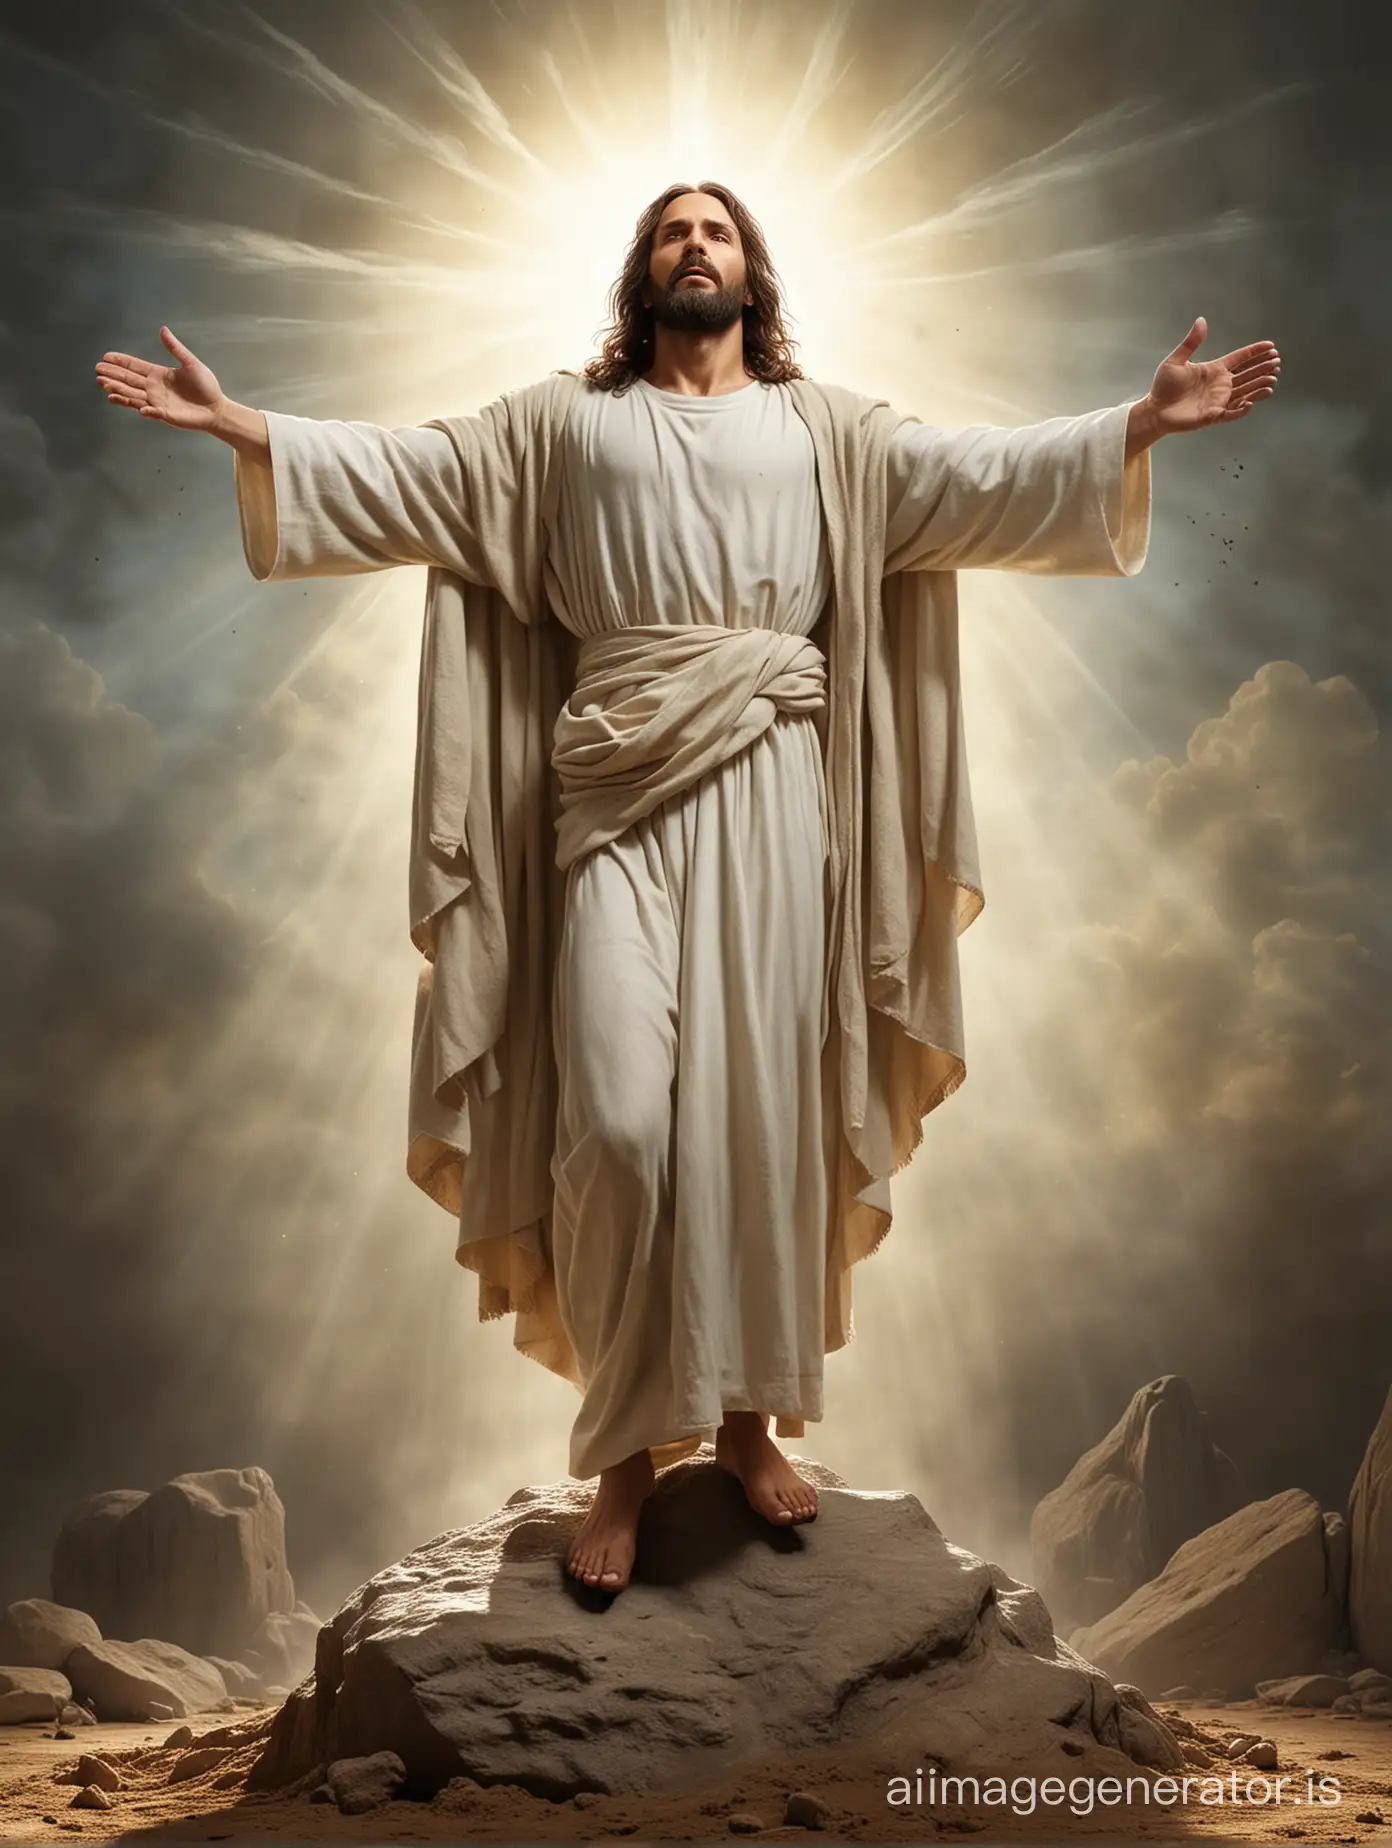 realistic picture of jesus resurrection, staring straight forward, full body, glory effect 
spread his arms, in tump
